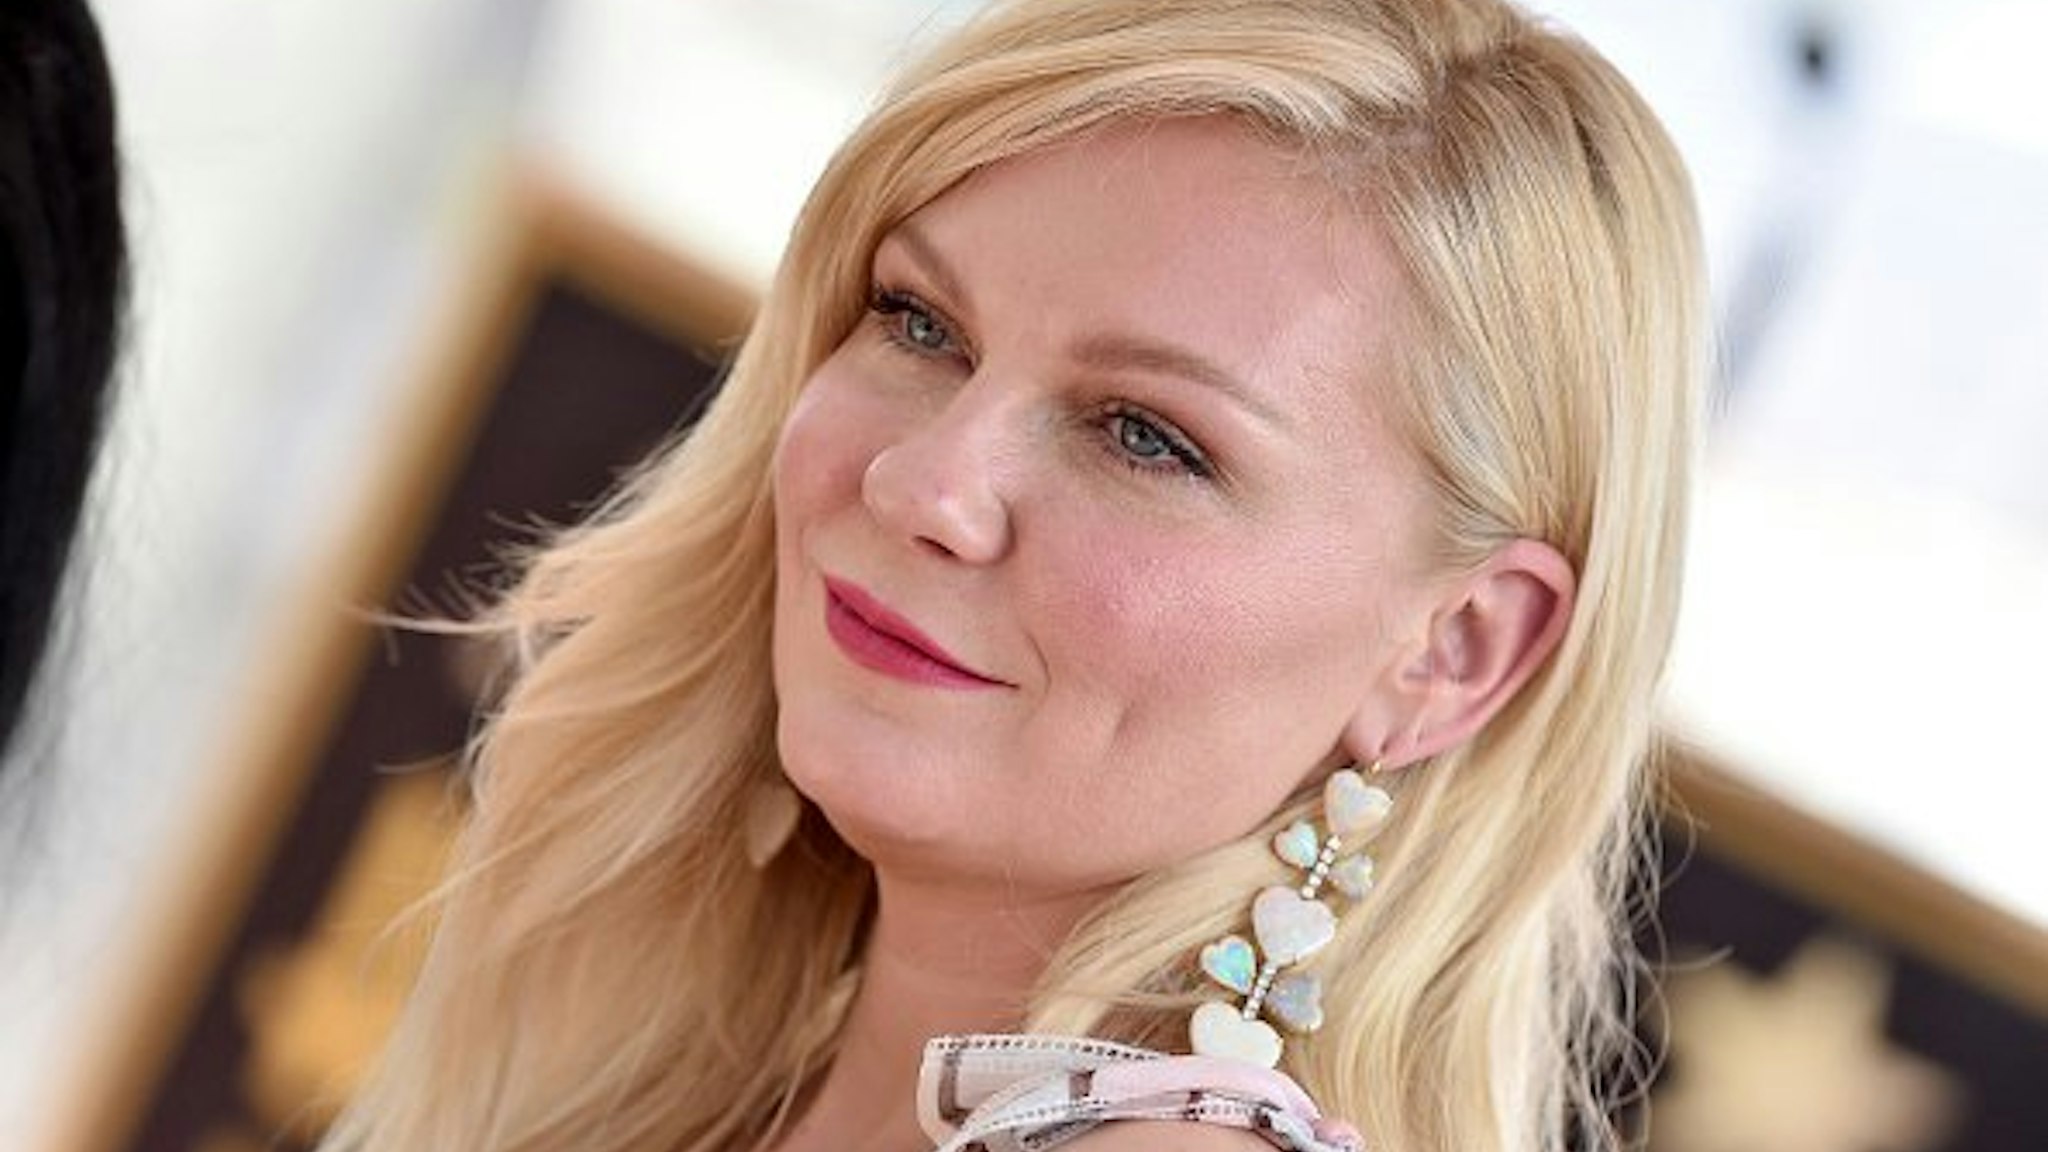 Kirsten Dunst is honored with a Star on the Hollywood Walk of Fame on August 29, 2019 in Hollywood, California.